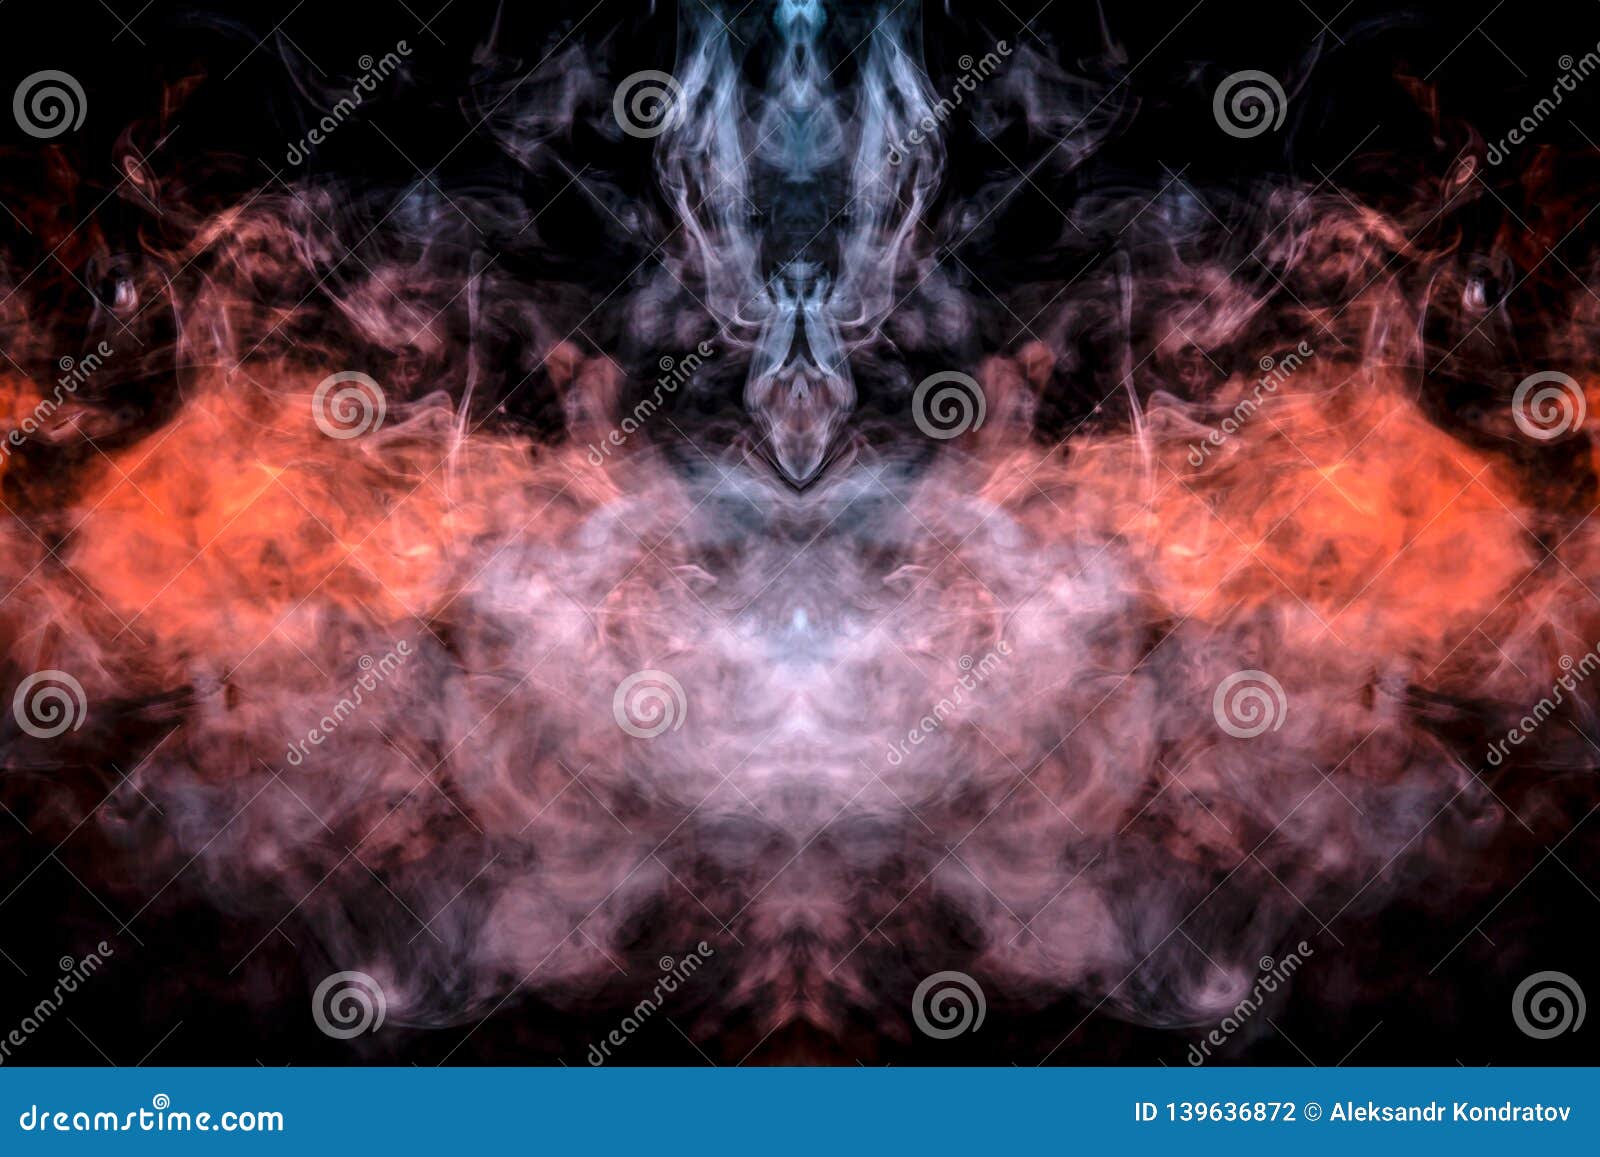 the head of a ghost on a black background from a smoke pattern of an orange-colored vape vaporizing like flame